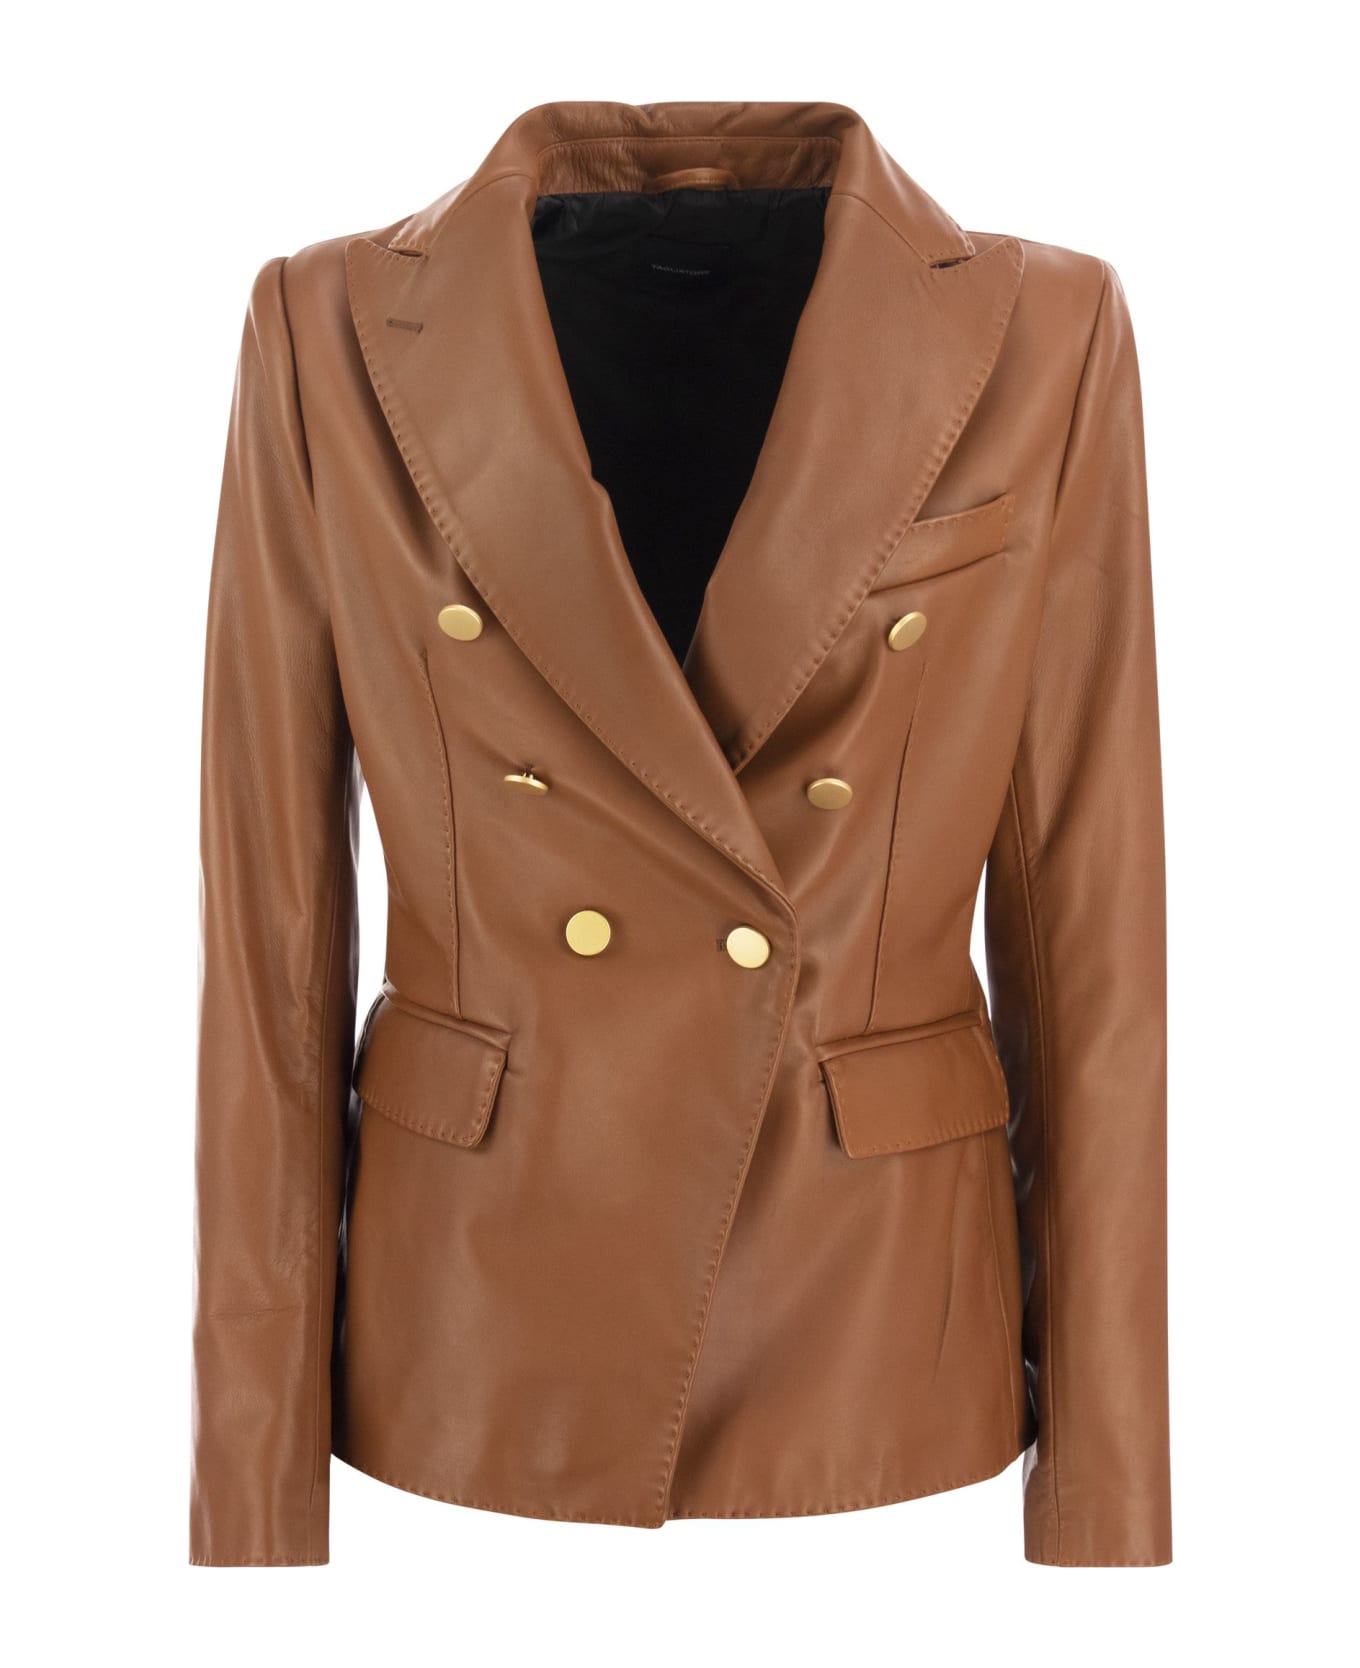 Tagliatore Lizzie- Double-breasted Leather Blazer - Leather